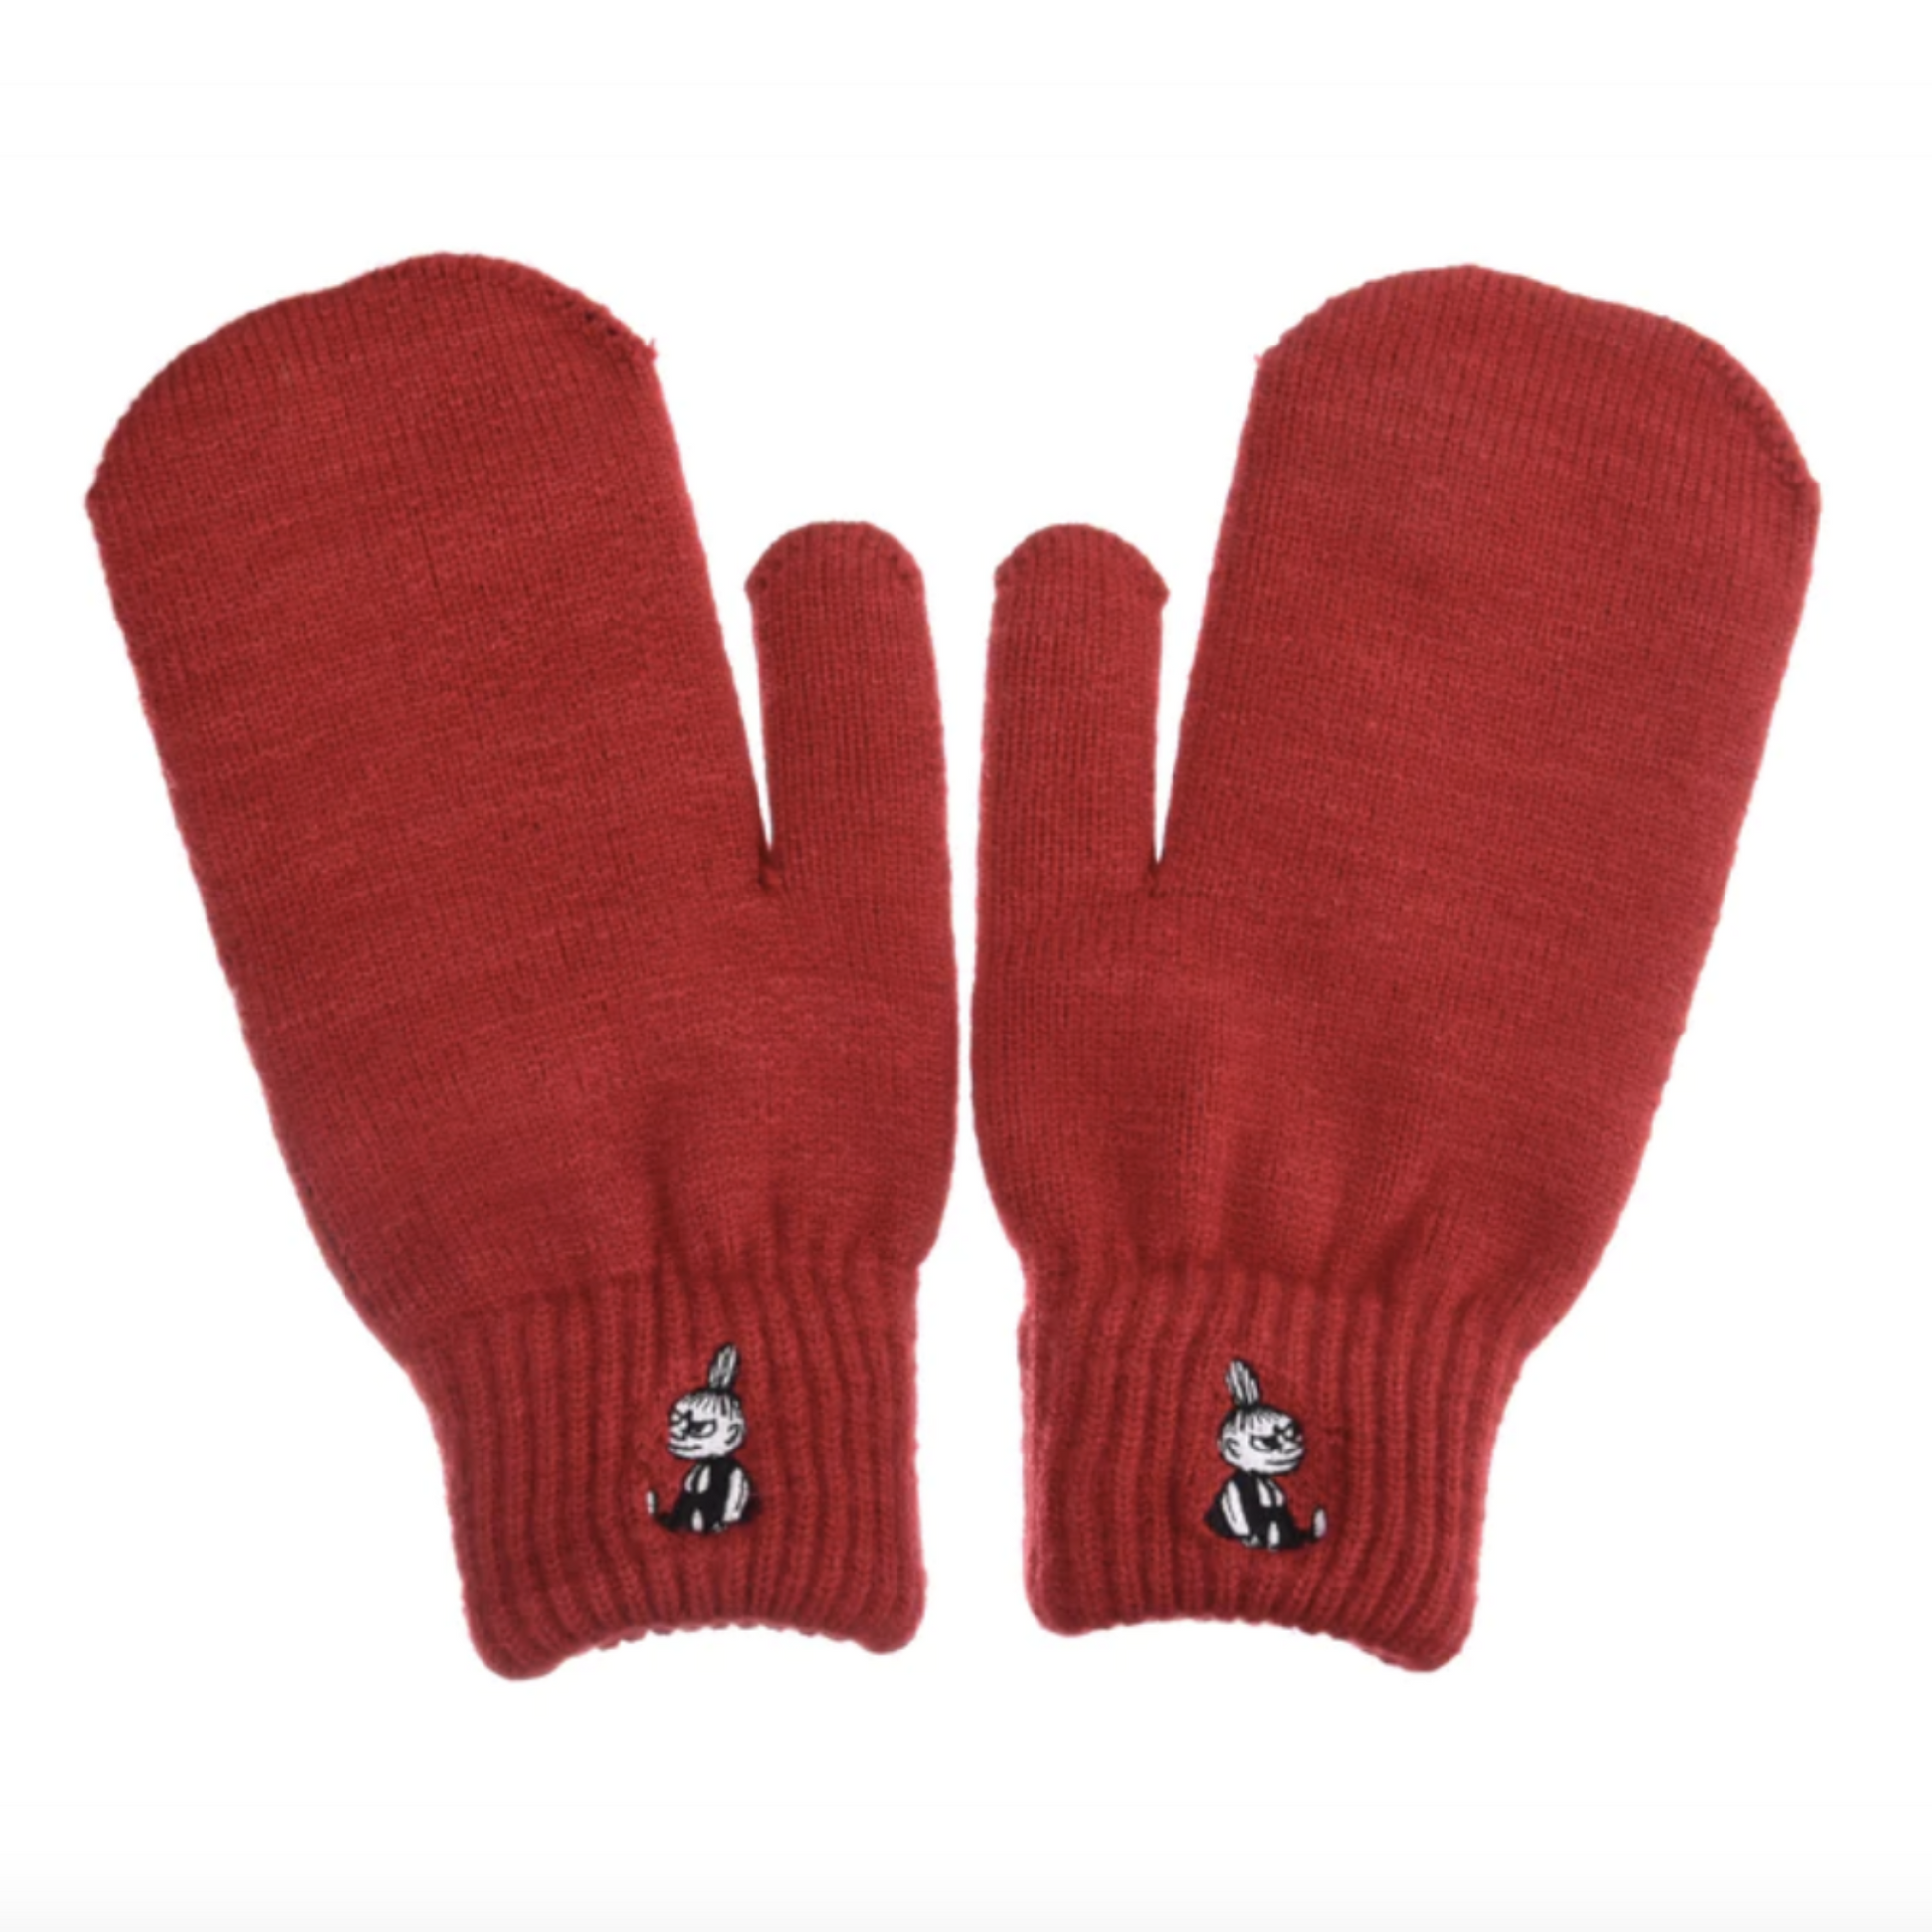 Little My Mittens Adults, Red (8355915104543)